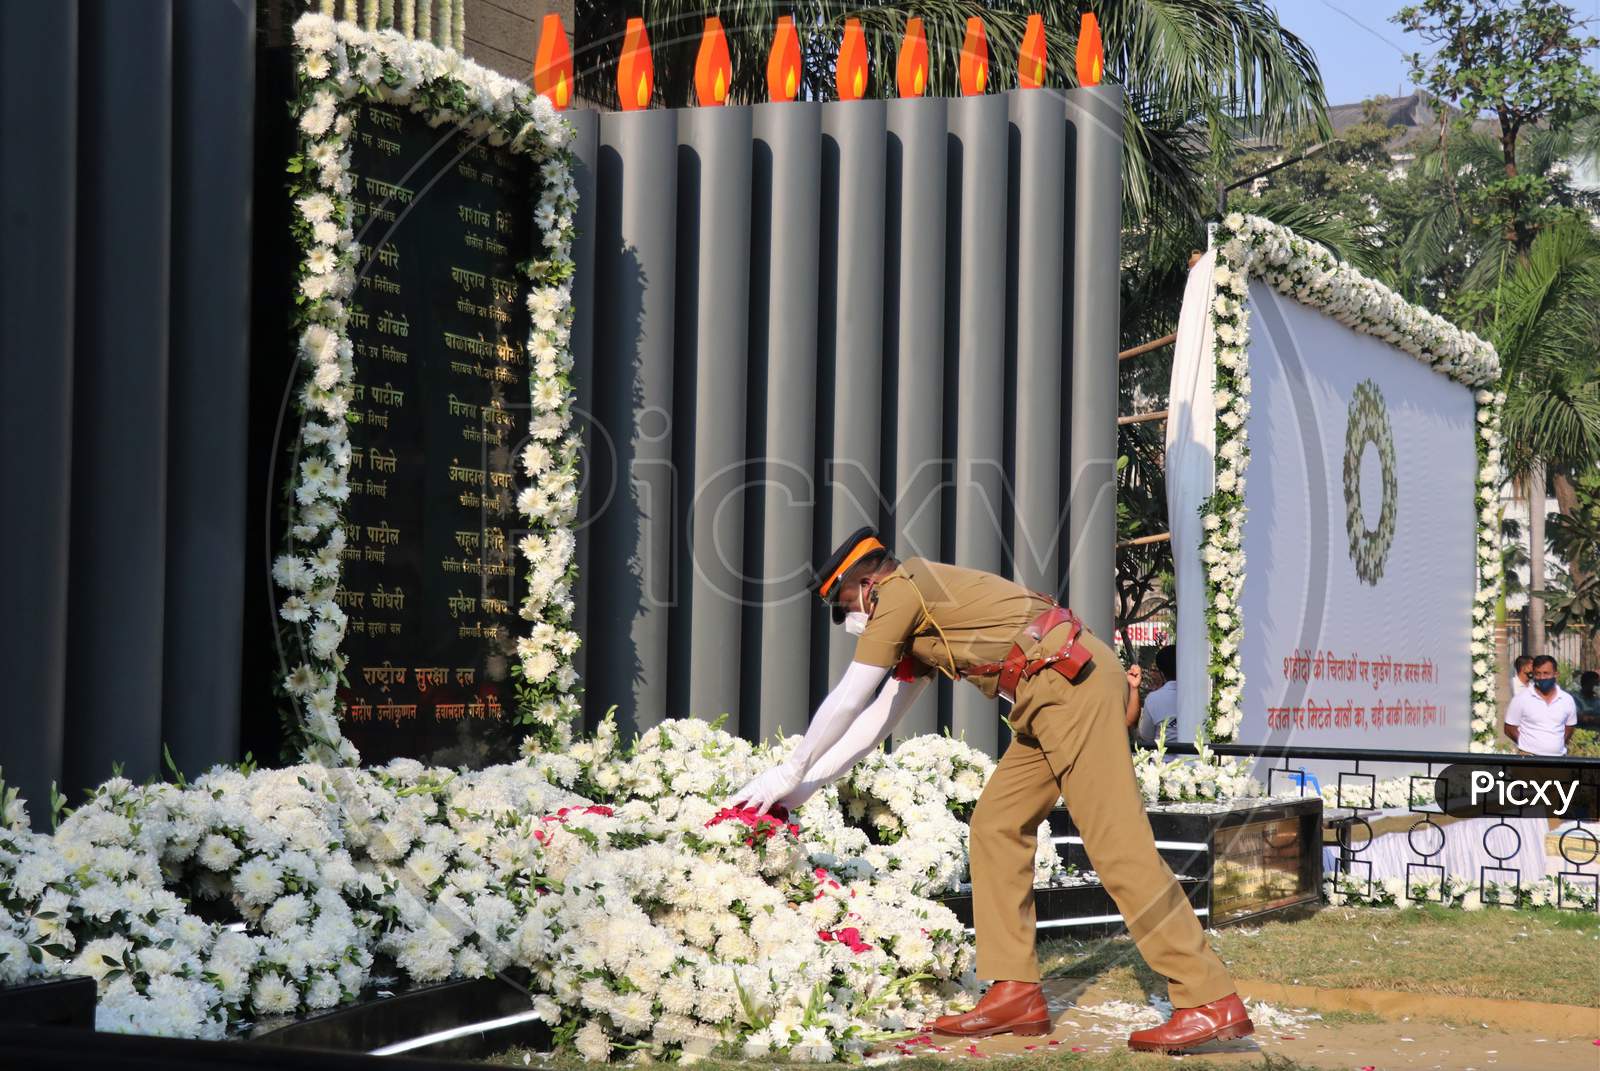 A police officer pays his respects at a memorial to mark the 12th anniversary of the November 26, 2008 attacks, in Mumbai, India November 26, 2020.